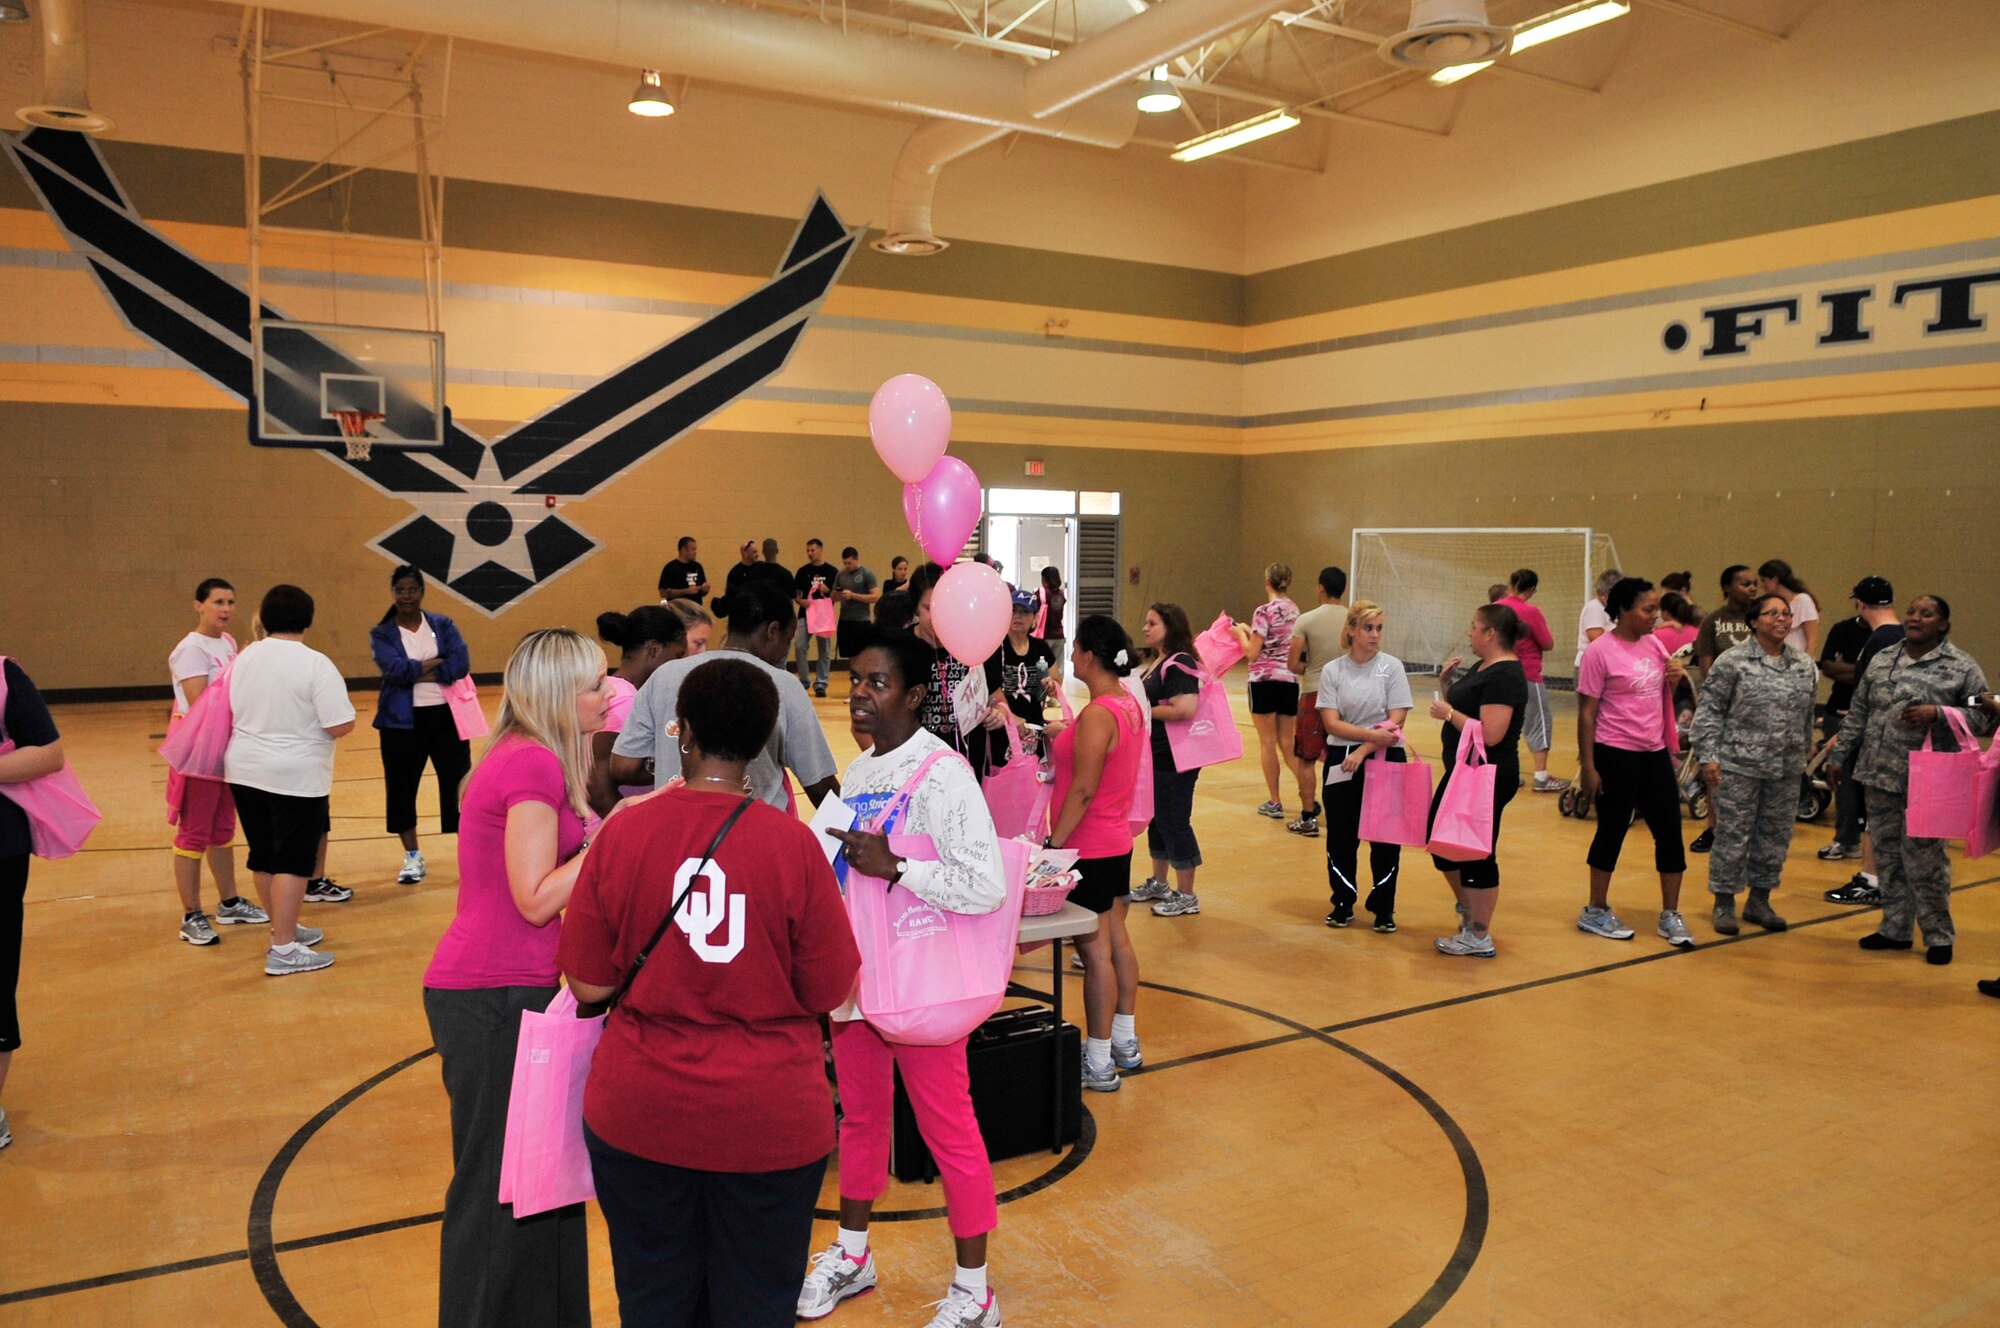 U.S. Air Force Airmen gather for the annual breast cancer awareness walk in the gymnasium at the fitness center, Shaw Air Force Base, S.C., Oct. 2, 2012.  The event was held by the Health and Wellness Center along with the 20th Medical Group.  More than 100 people participated in the walk. (U.S. Air Force photo by Airman Nicole Sikorski/Released)